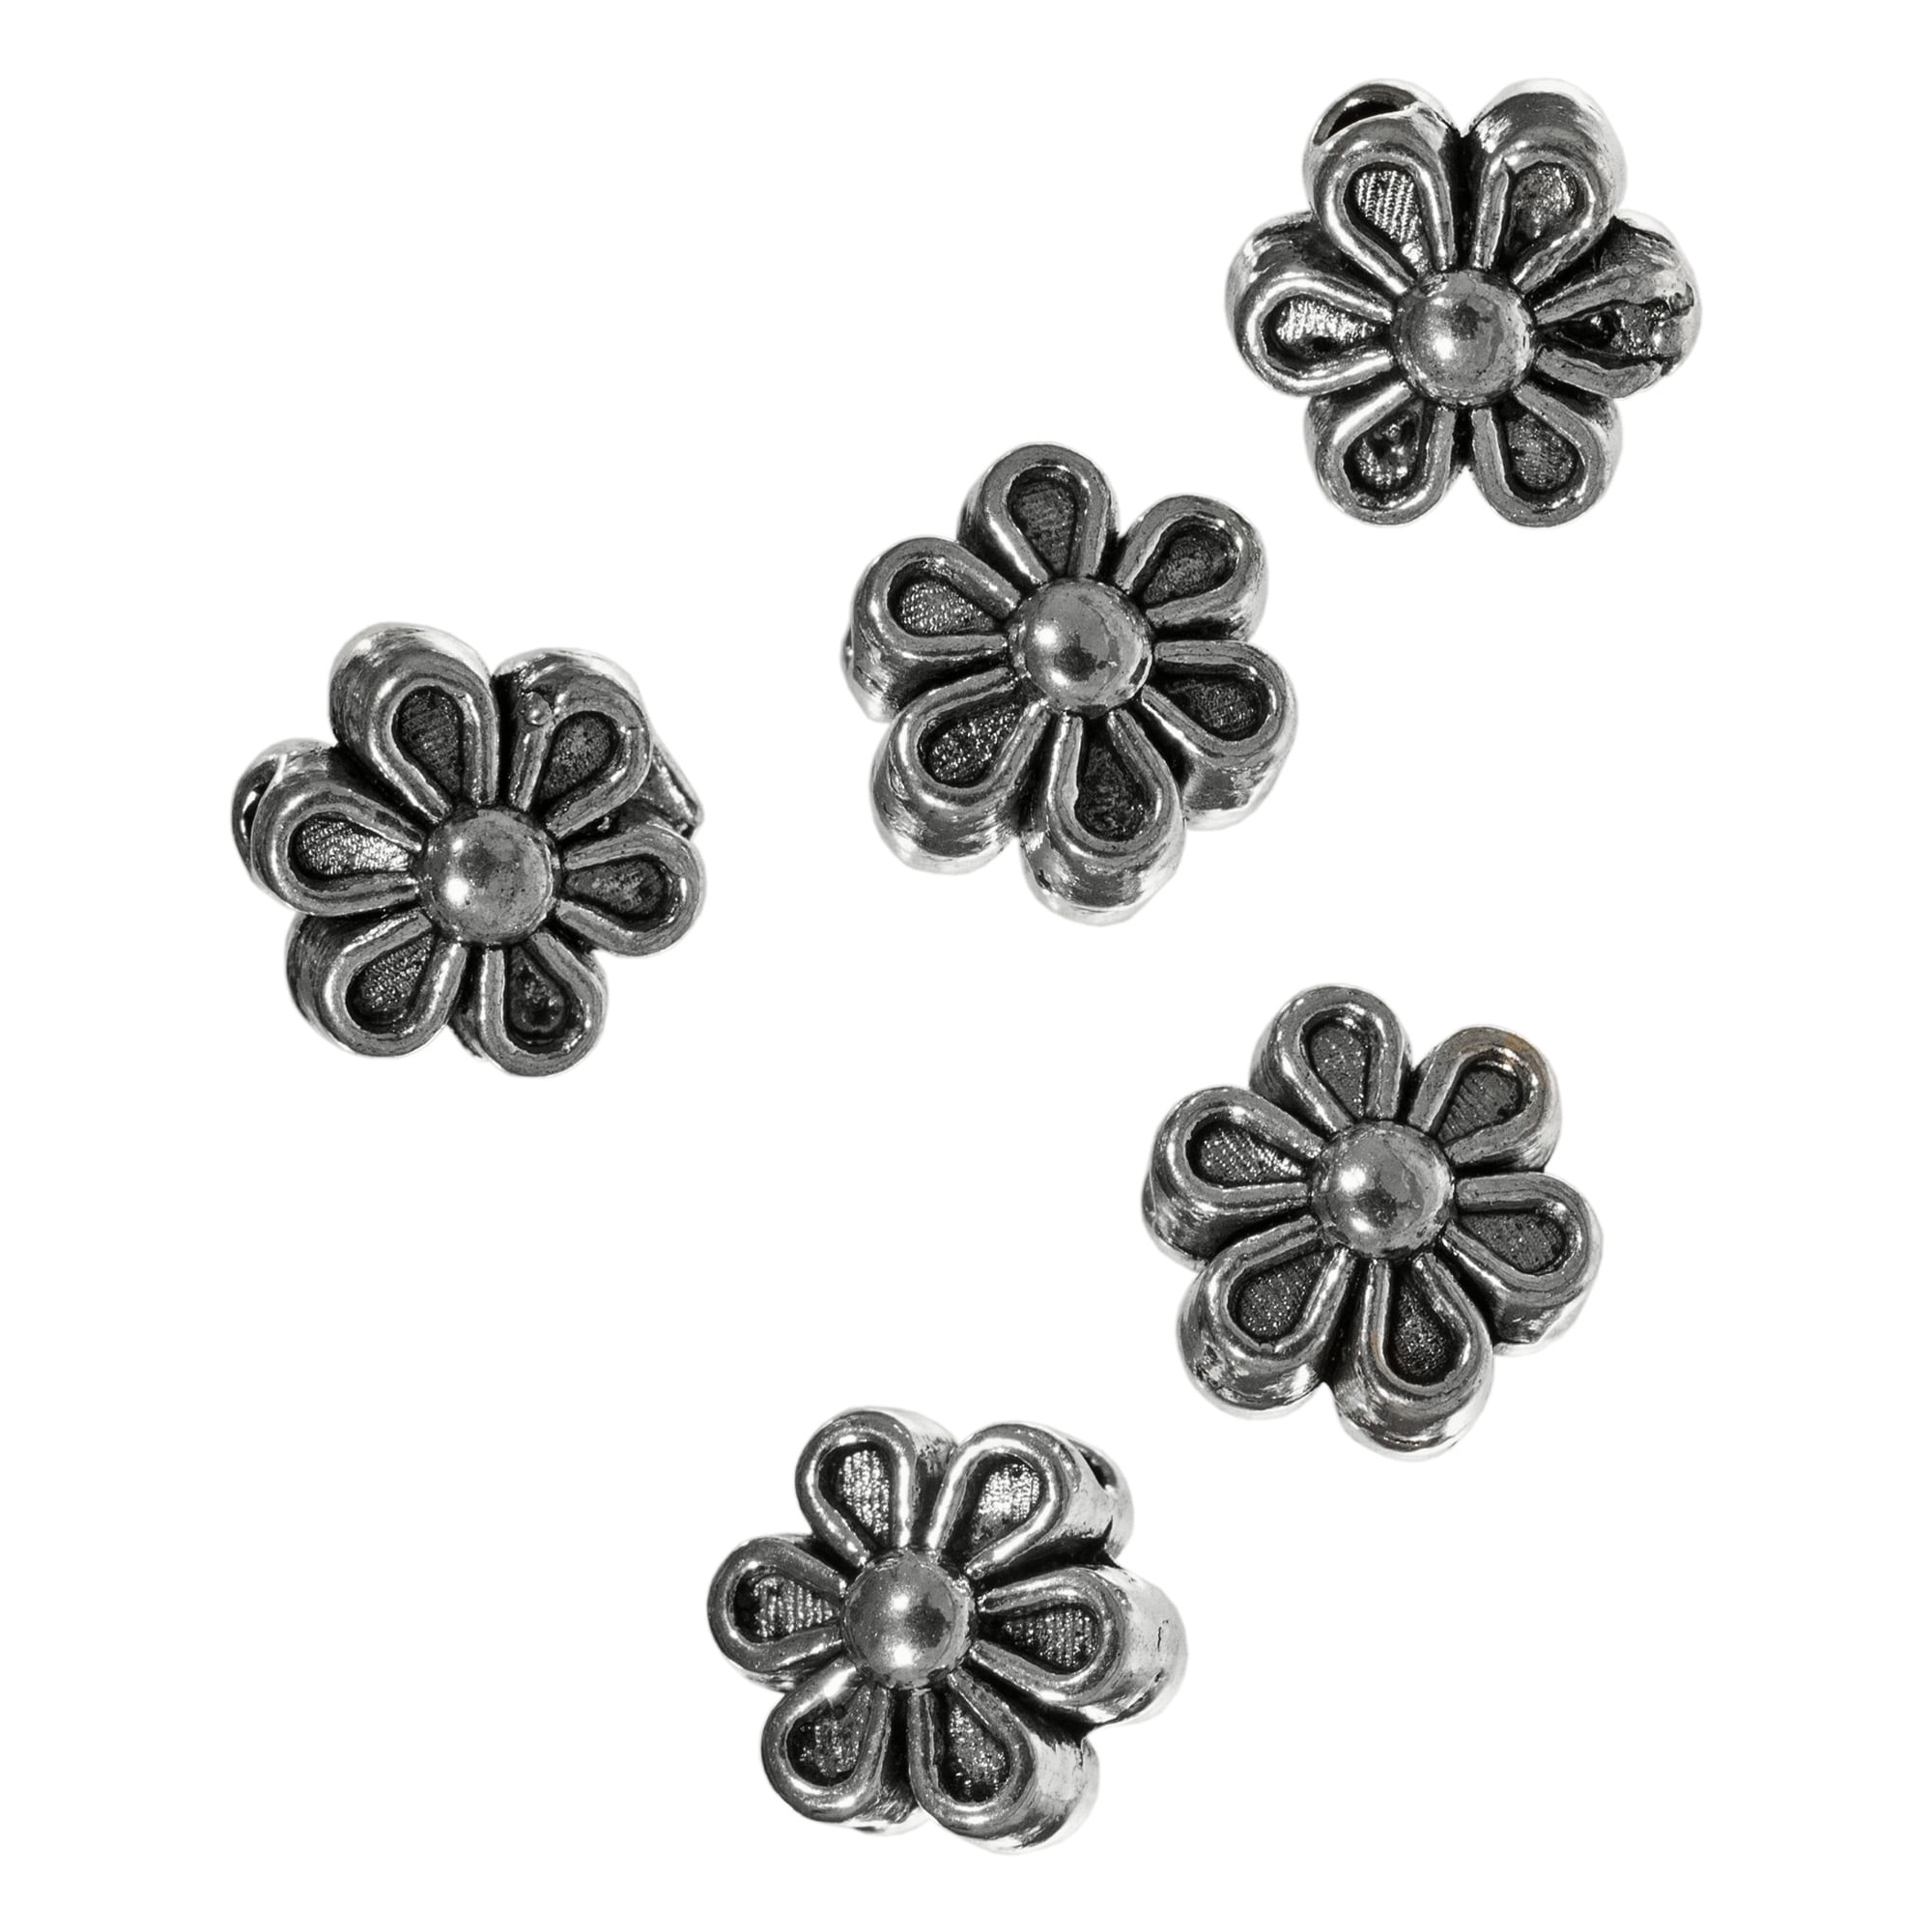 120pcs Jewelry Making Tibetan Silver flower Spacer Bead Caps Charms 10mm 